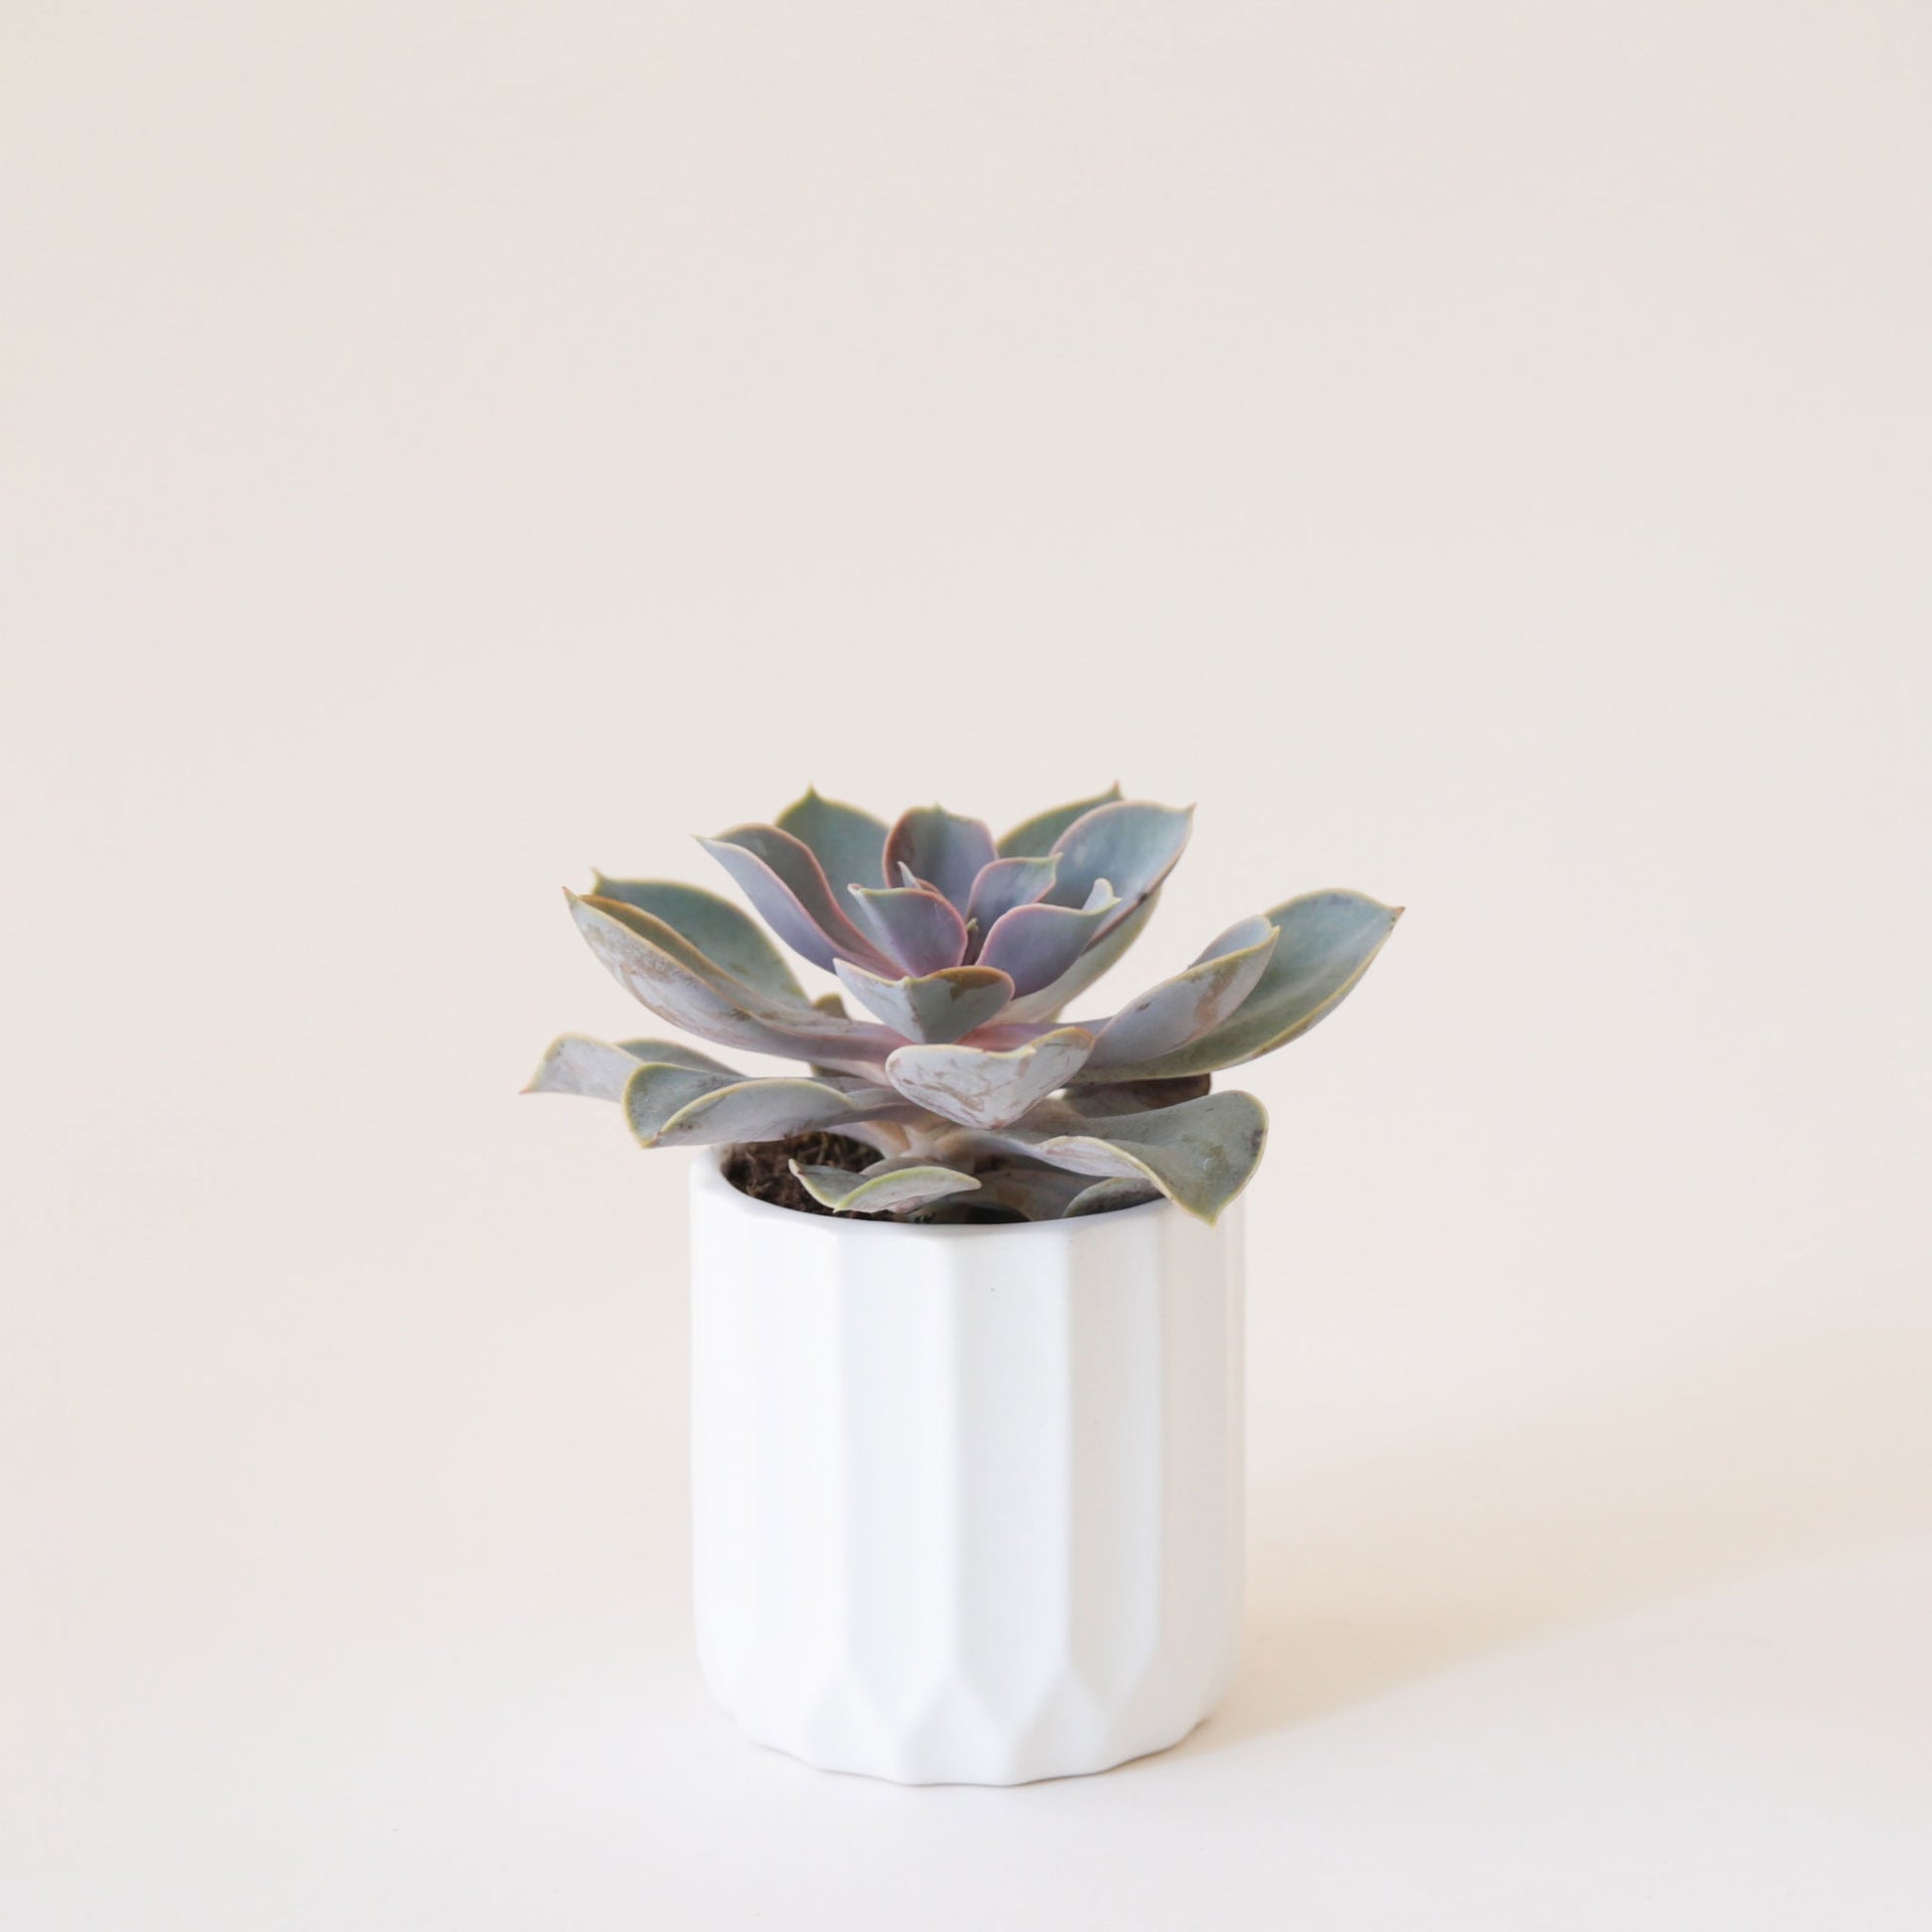 The smaller of the two fluted ceramic pots on a cream background and holding a purple ish succulent.